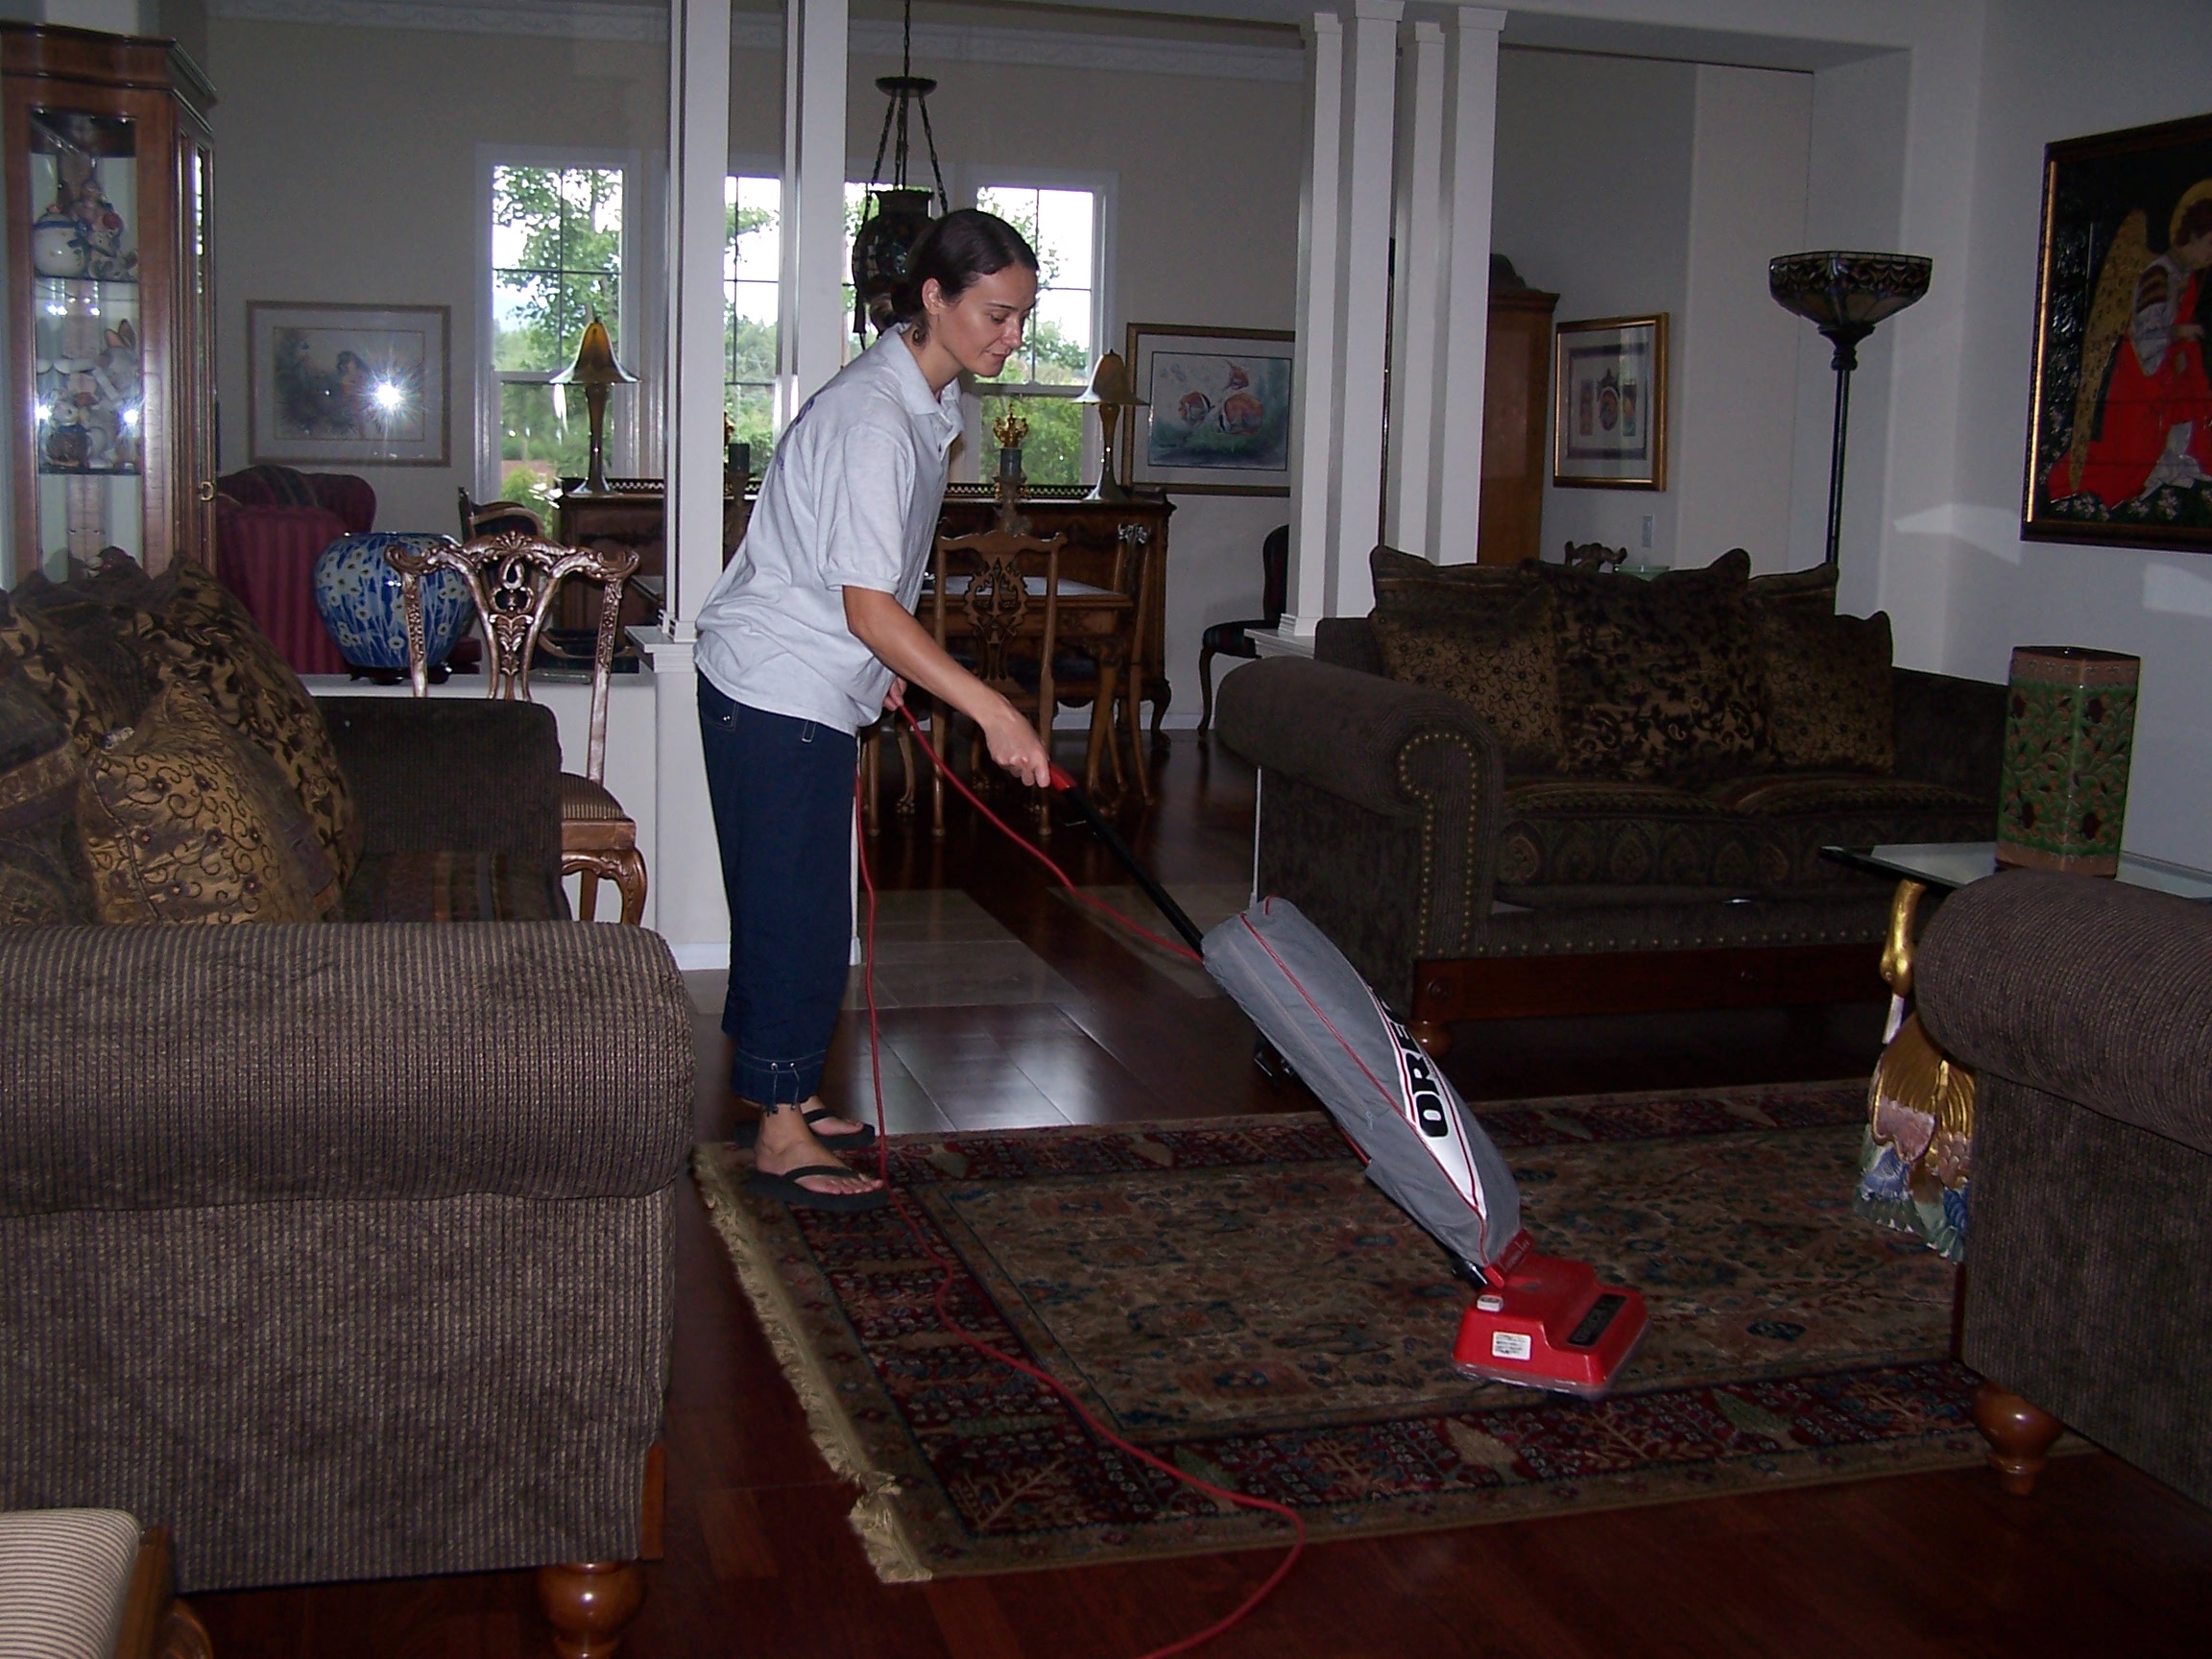 A picture of our staff vacuuming the floor